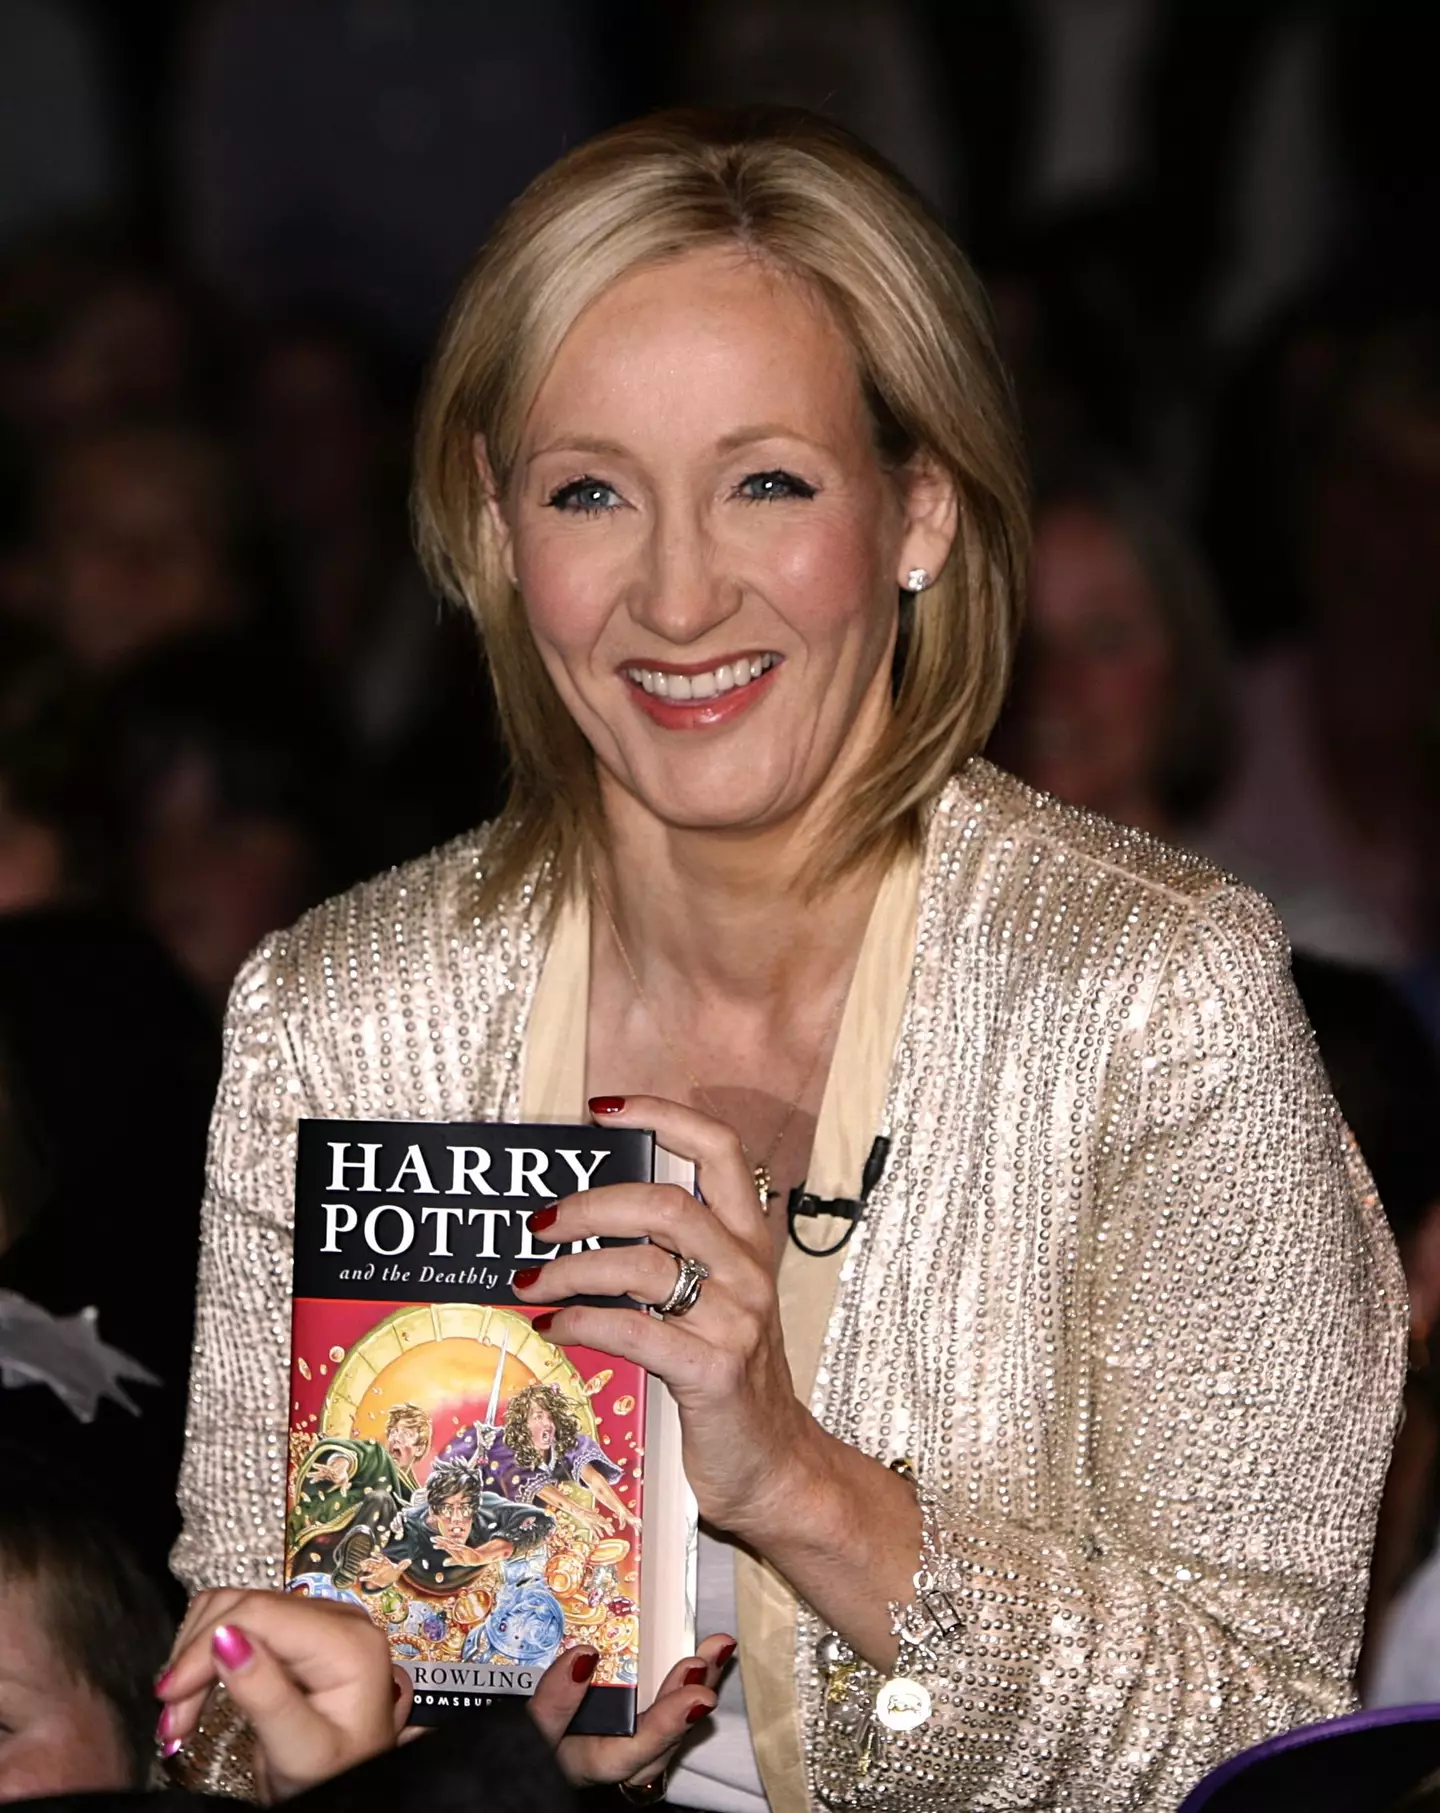 JK Rowling announces adaptation of her books as new TV series.